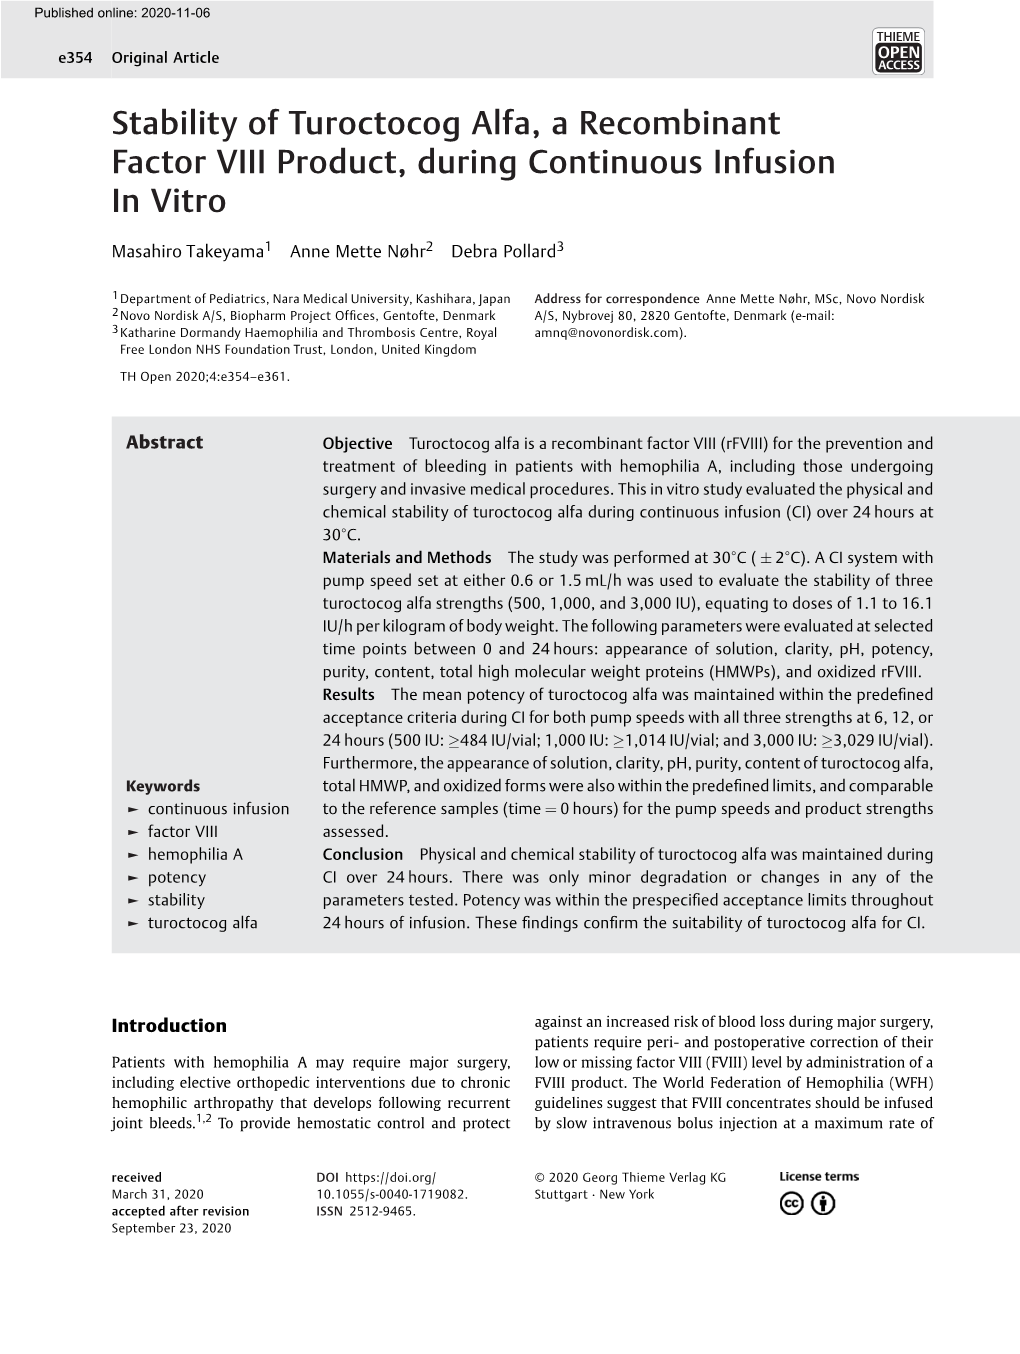 Stability of Turoctocog Alfa, a Recombinant Factor VIII Product, During Continuous Infusion in Vitro